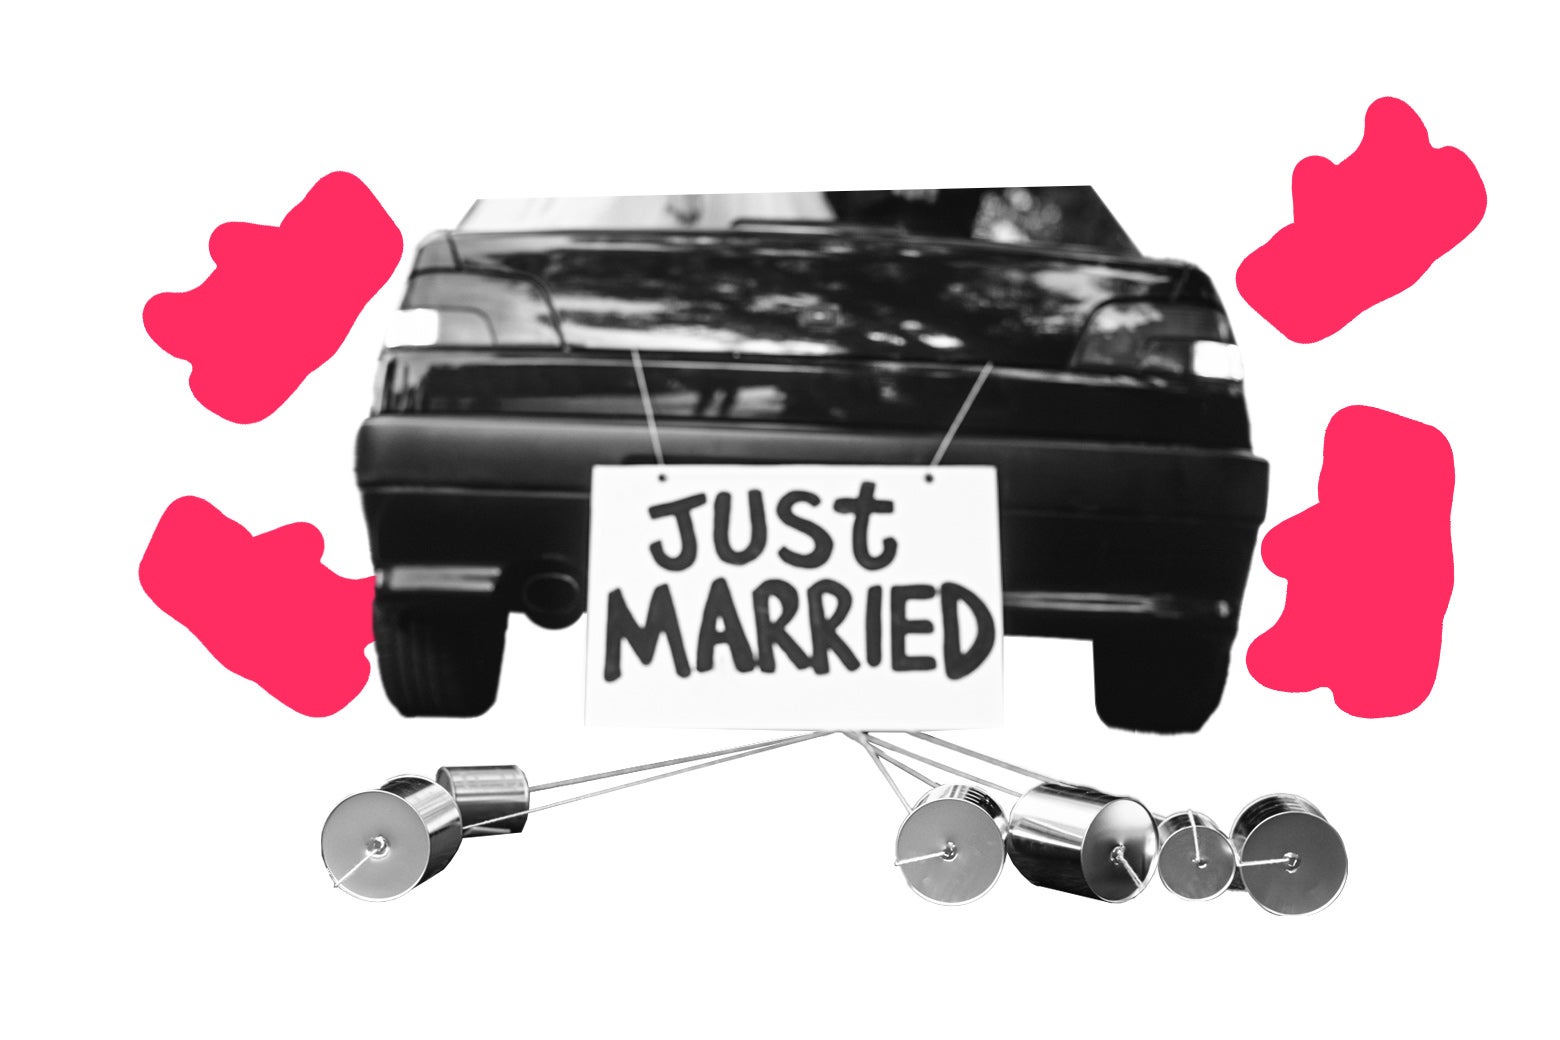 Car driving away with a just married sign on it.